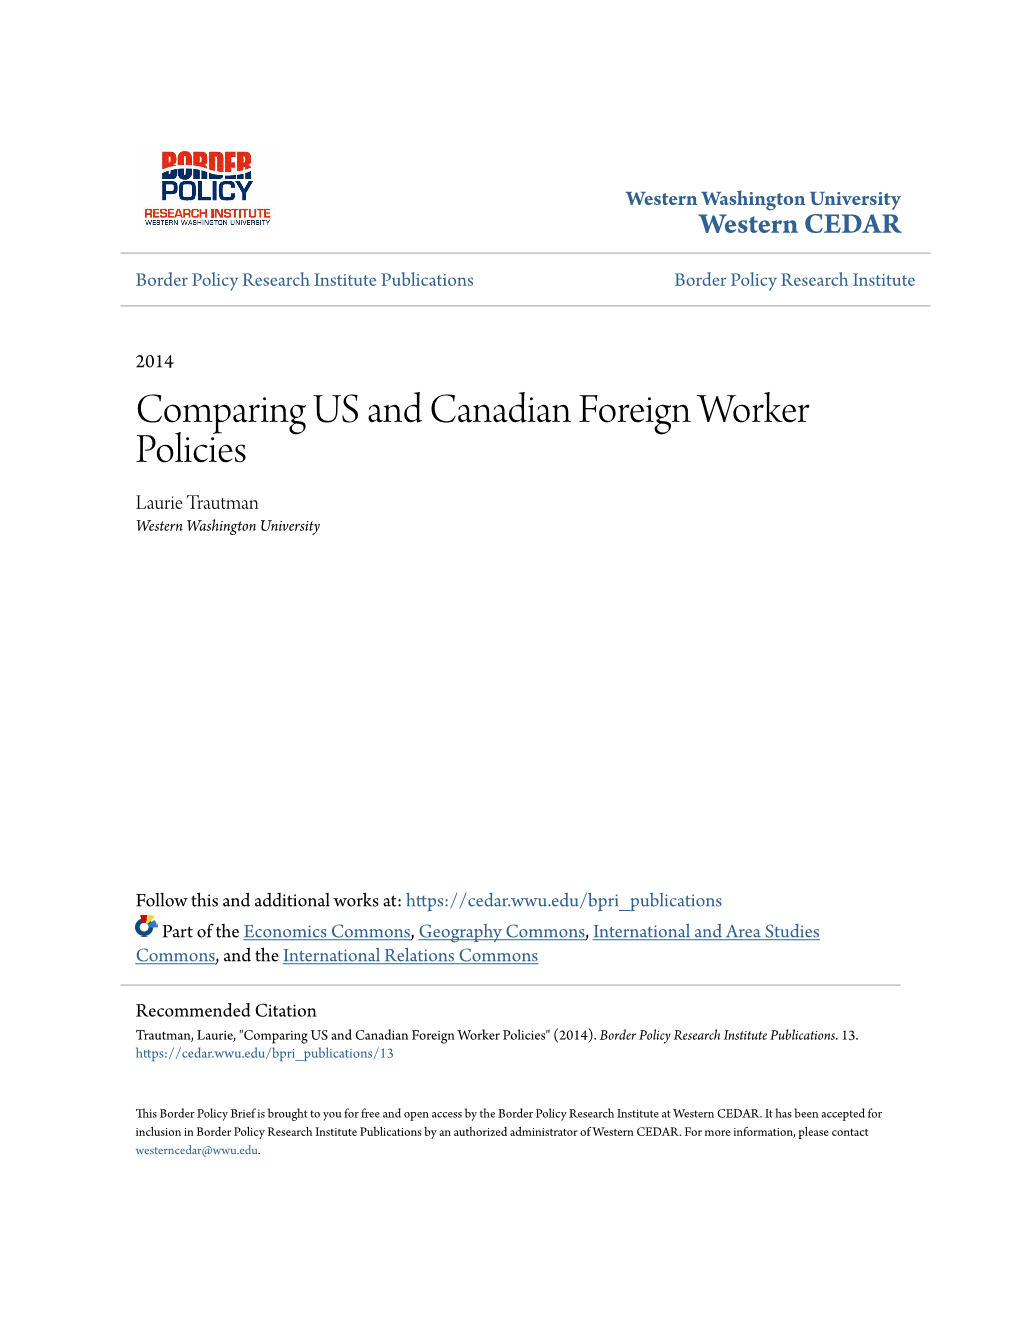 Comparing US and Canadian Foreign Worker Policies Laurie Trautman Western Washington University